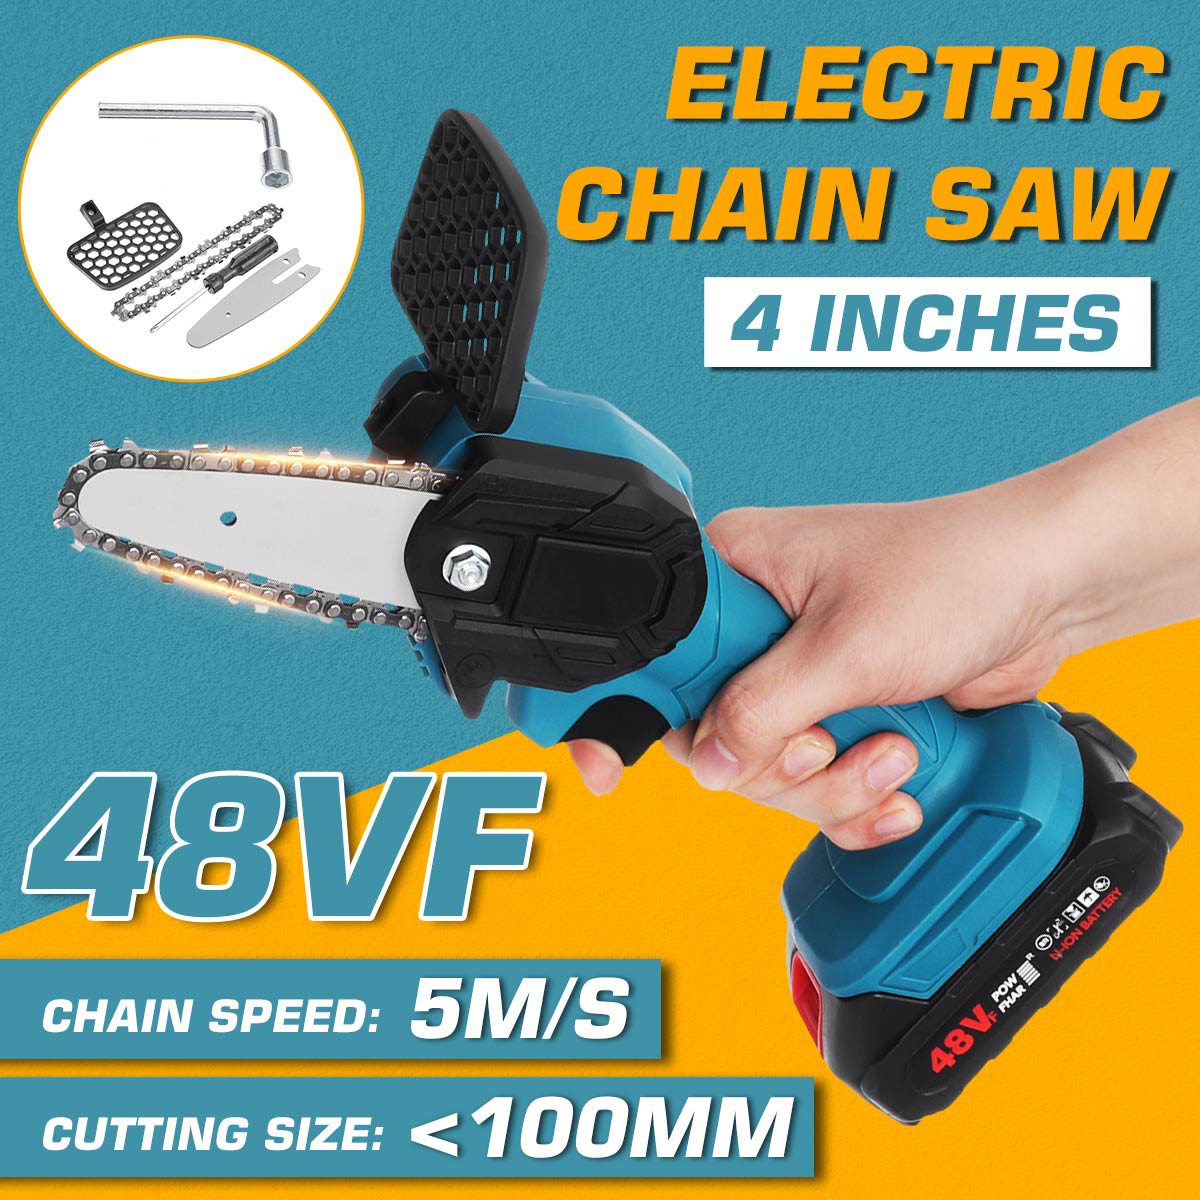 4inch-800W-48VF-Electric-Chain-Saw-Portable-Handheld-Wood-Cutter-Woodworking-Cutting-Tool-W-None1pc2-1827618-2